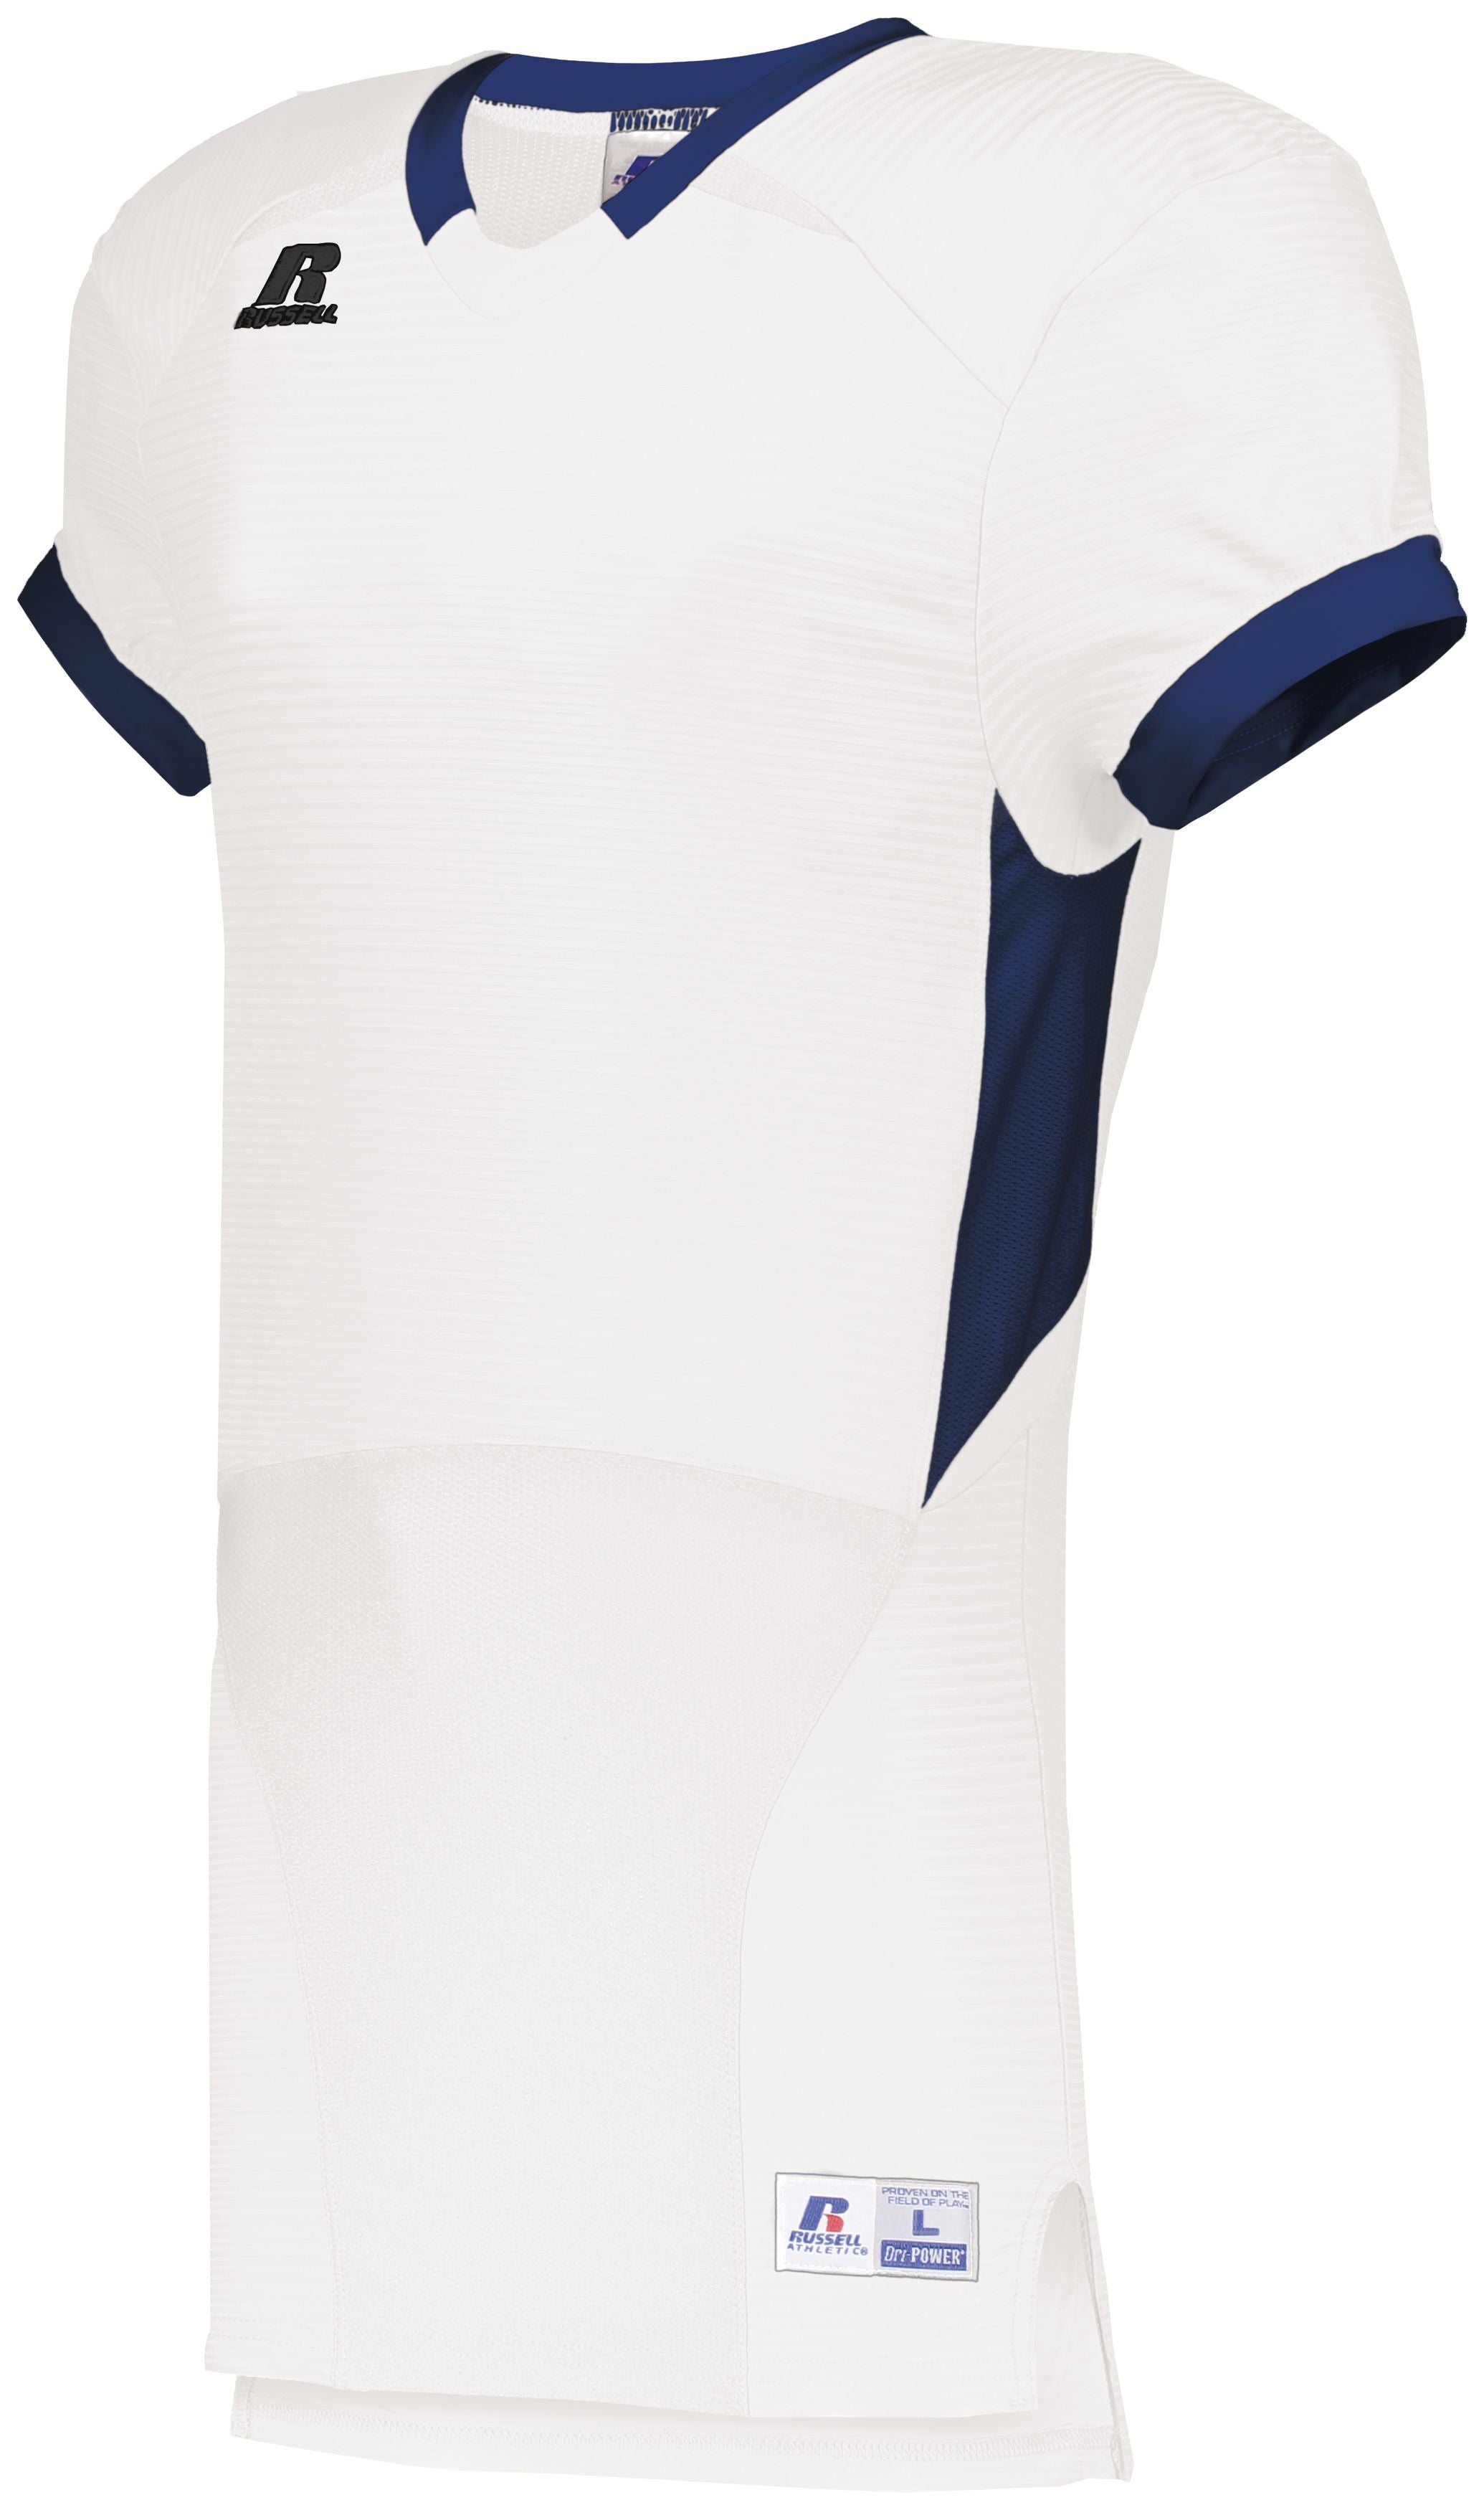 Russell Athletic Color Block Game Jersey in White/Navy  -Part of the Adult, Adult-Jersey, Football, Russell-Athletic-Products, Shirts, All-Sports, All-Sports-1 product lines at KanaleyCreations.com